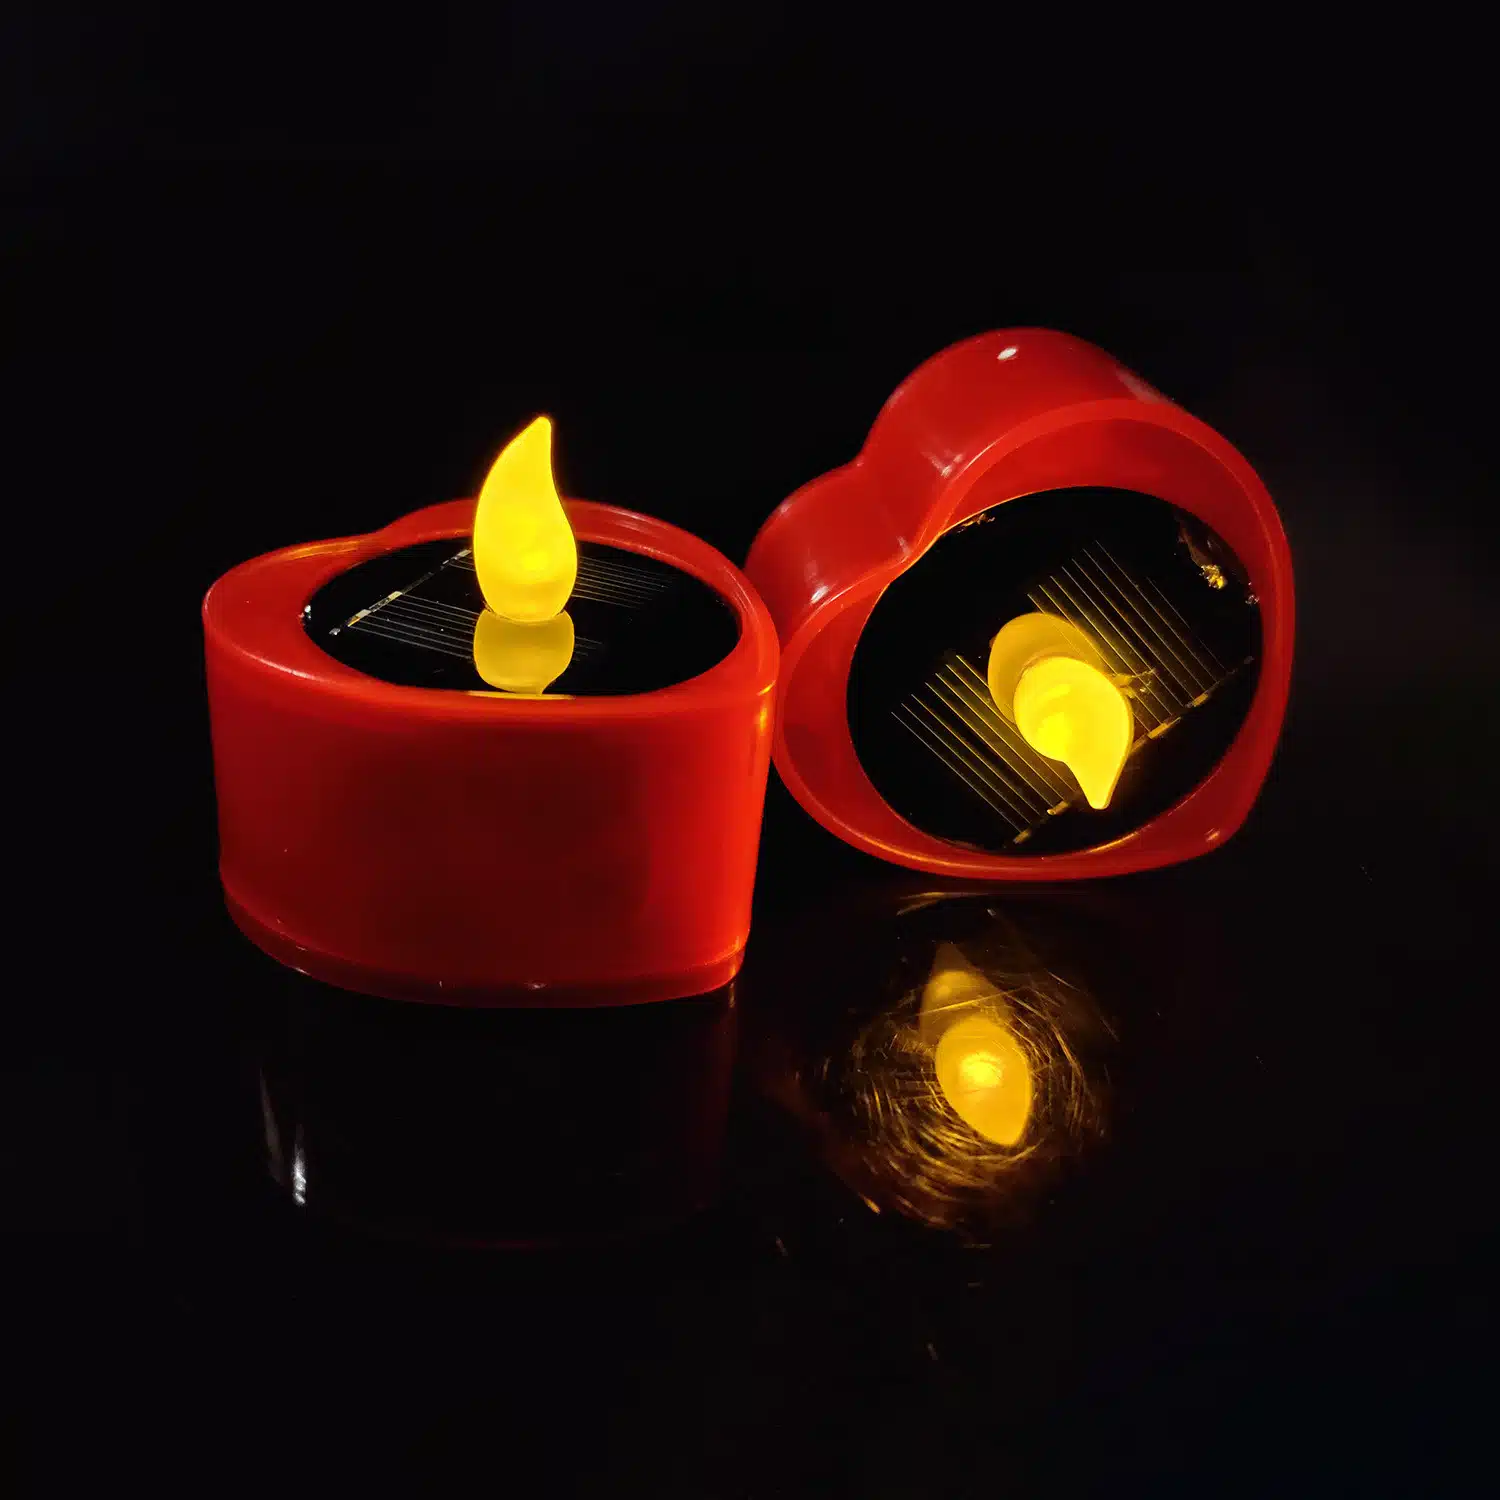 Bougie solaire LED rouge Coraz - Nos bougies LED rechargeables